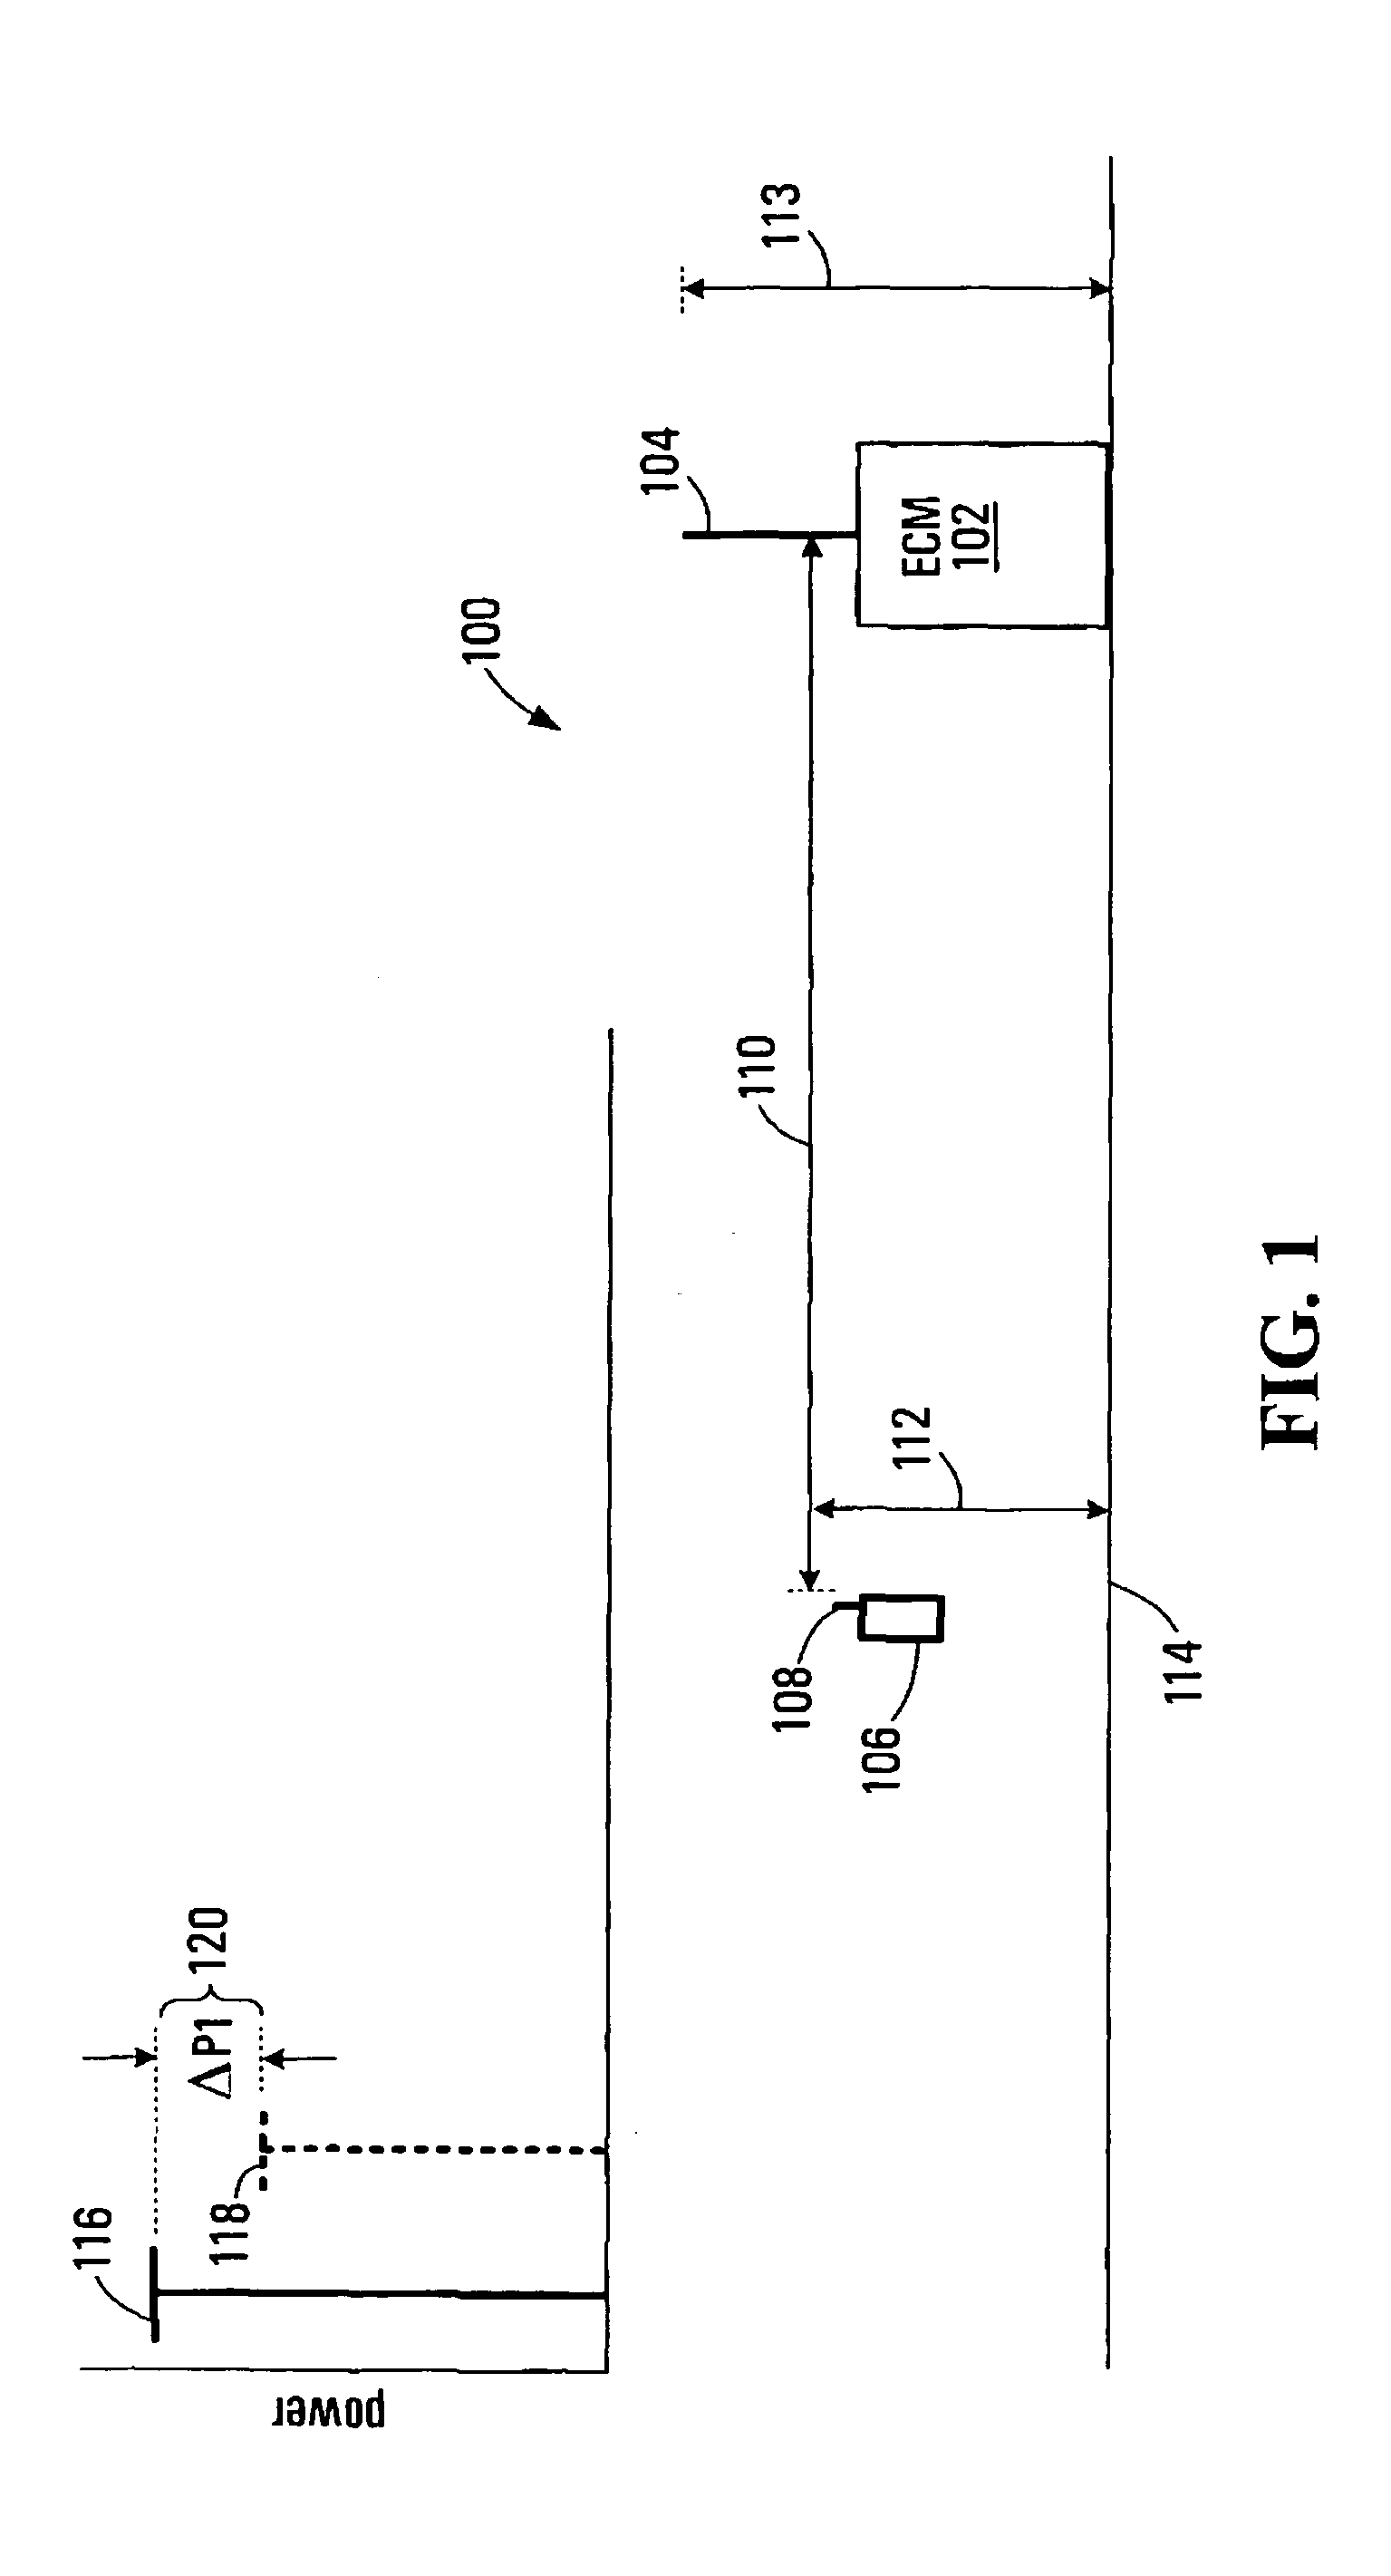 Method and device for estimation of the transmission characteristics of a radio frequency system